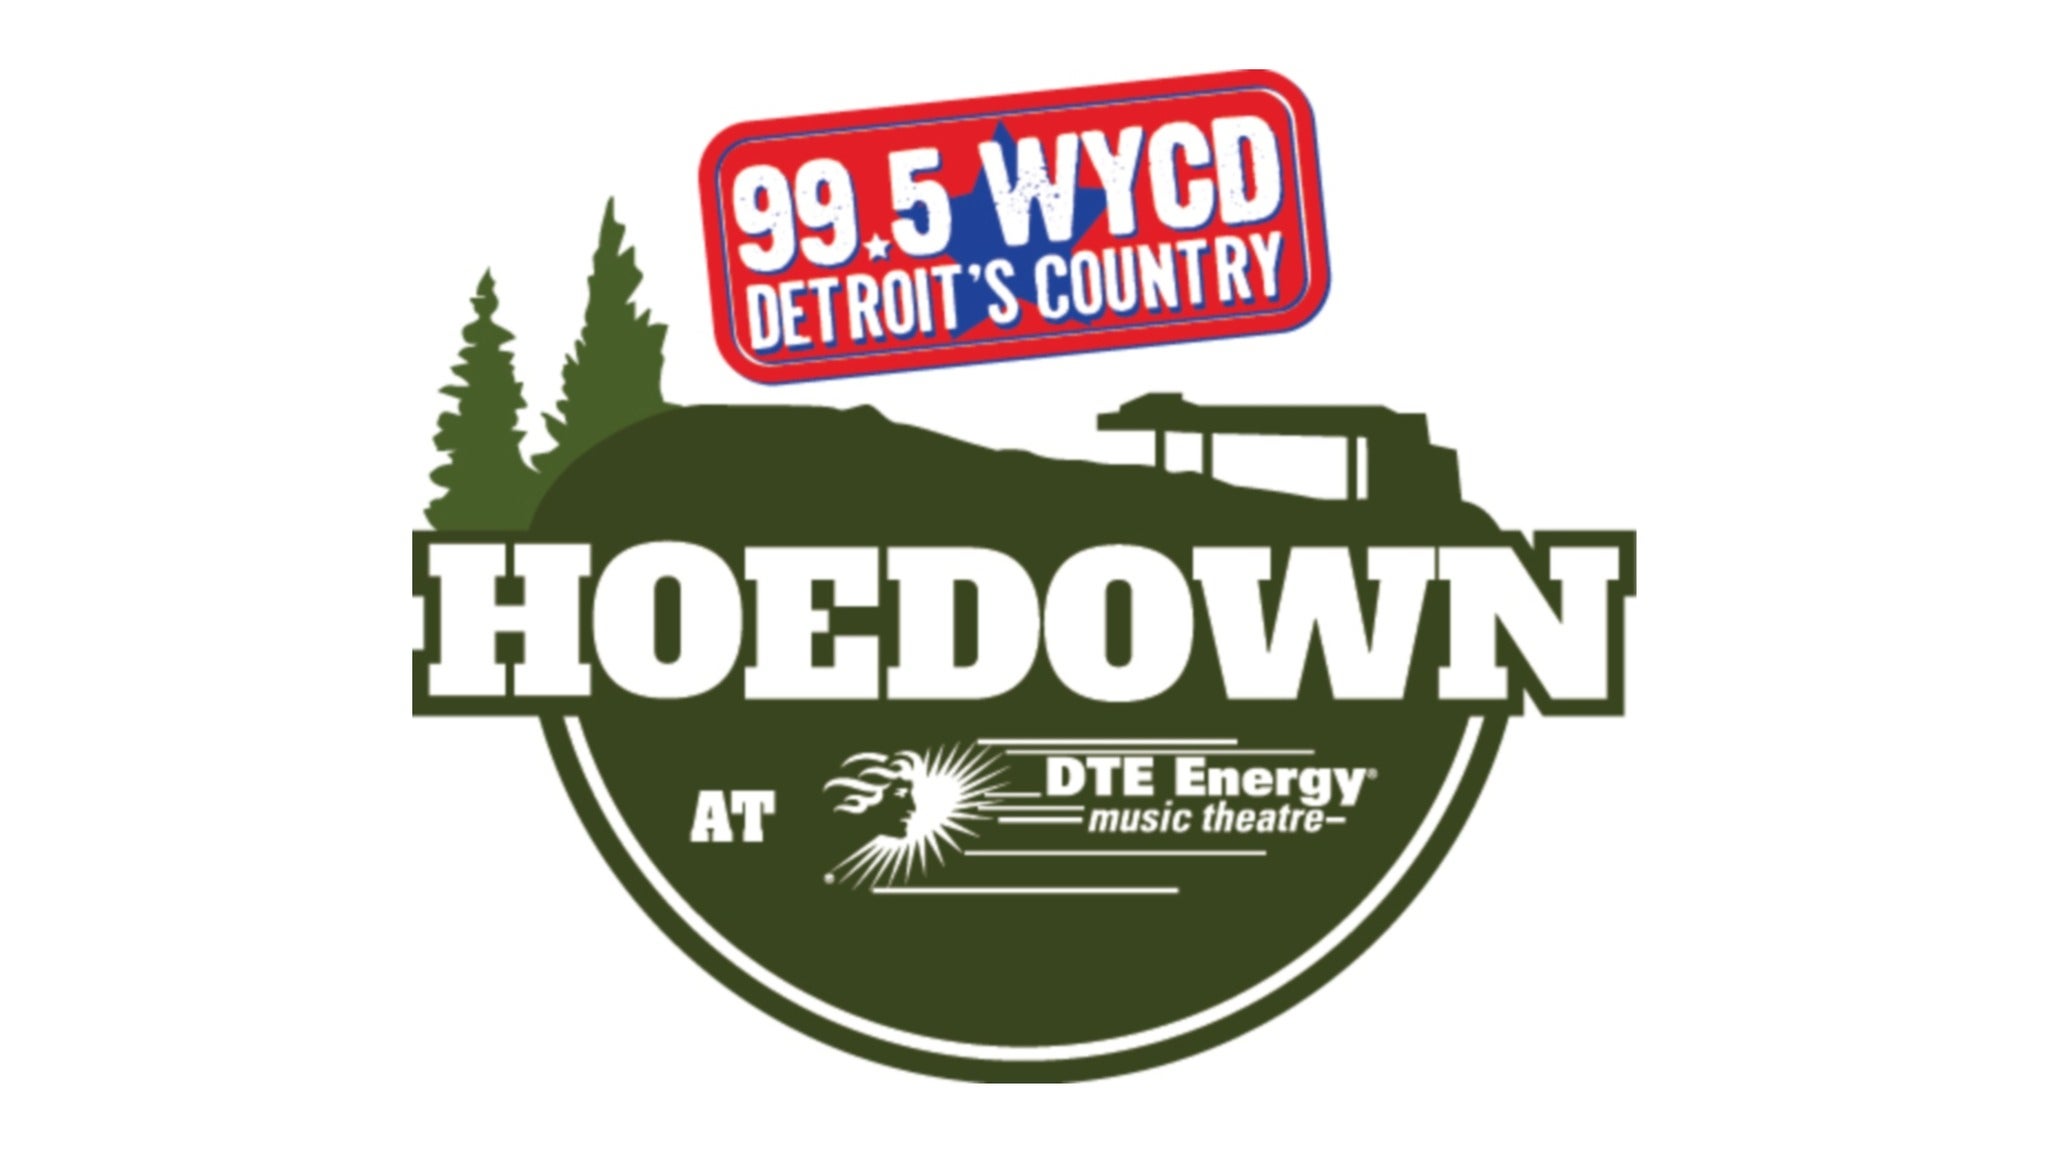 99.5 WYCD Hoedown Featuring Lady A in Clarkston promo photo for Citi® Cardmember Preferred presale offer code